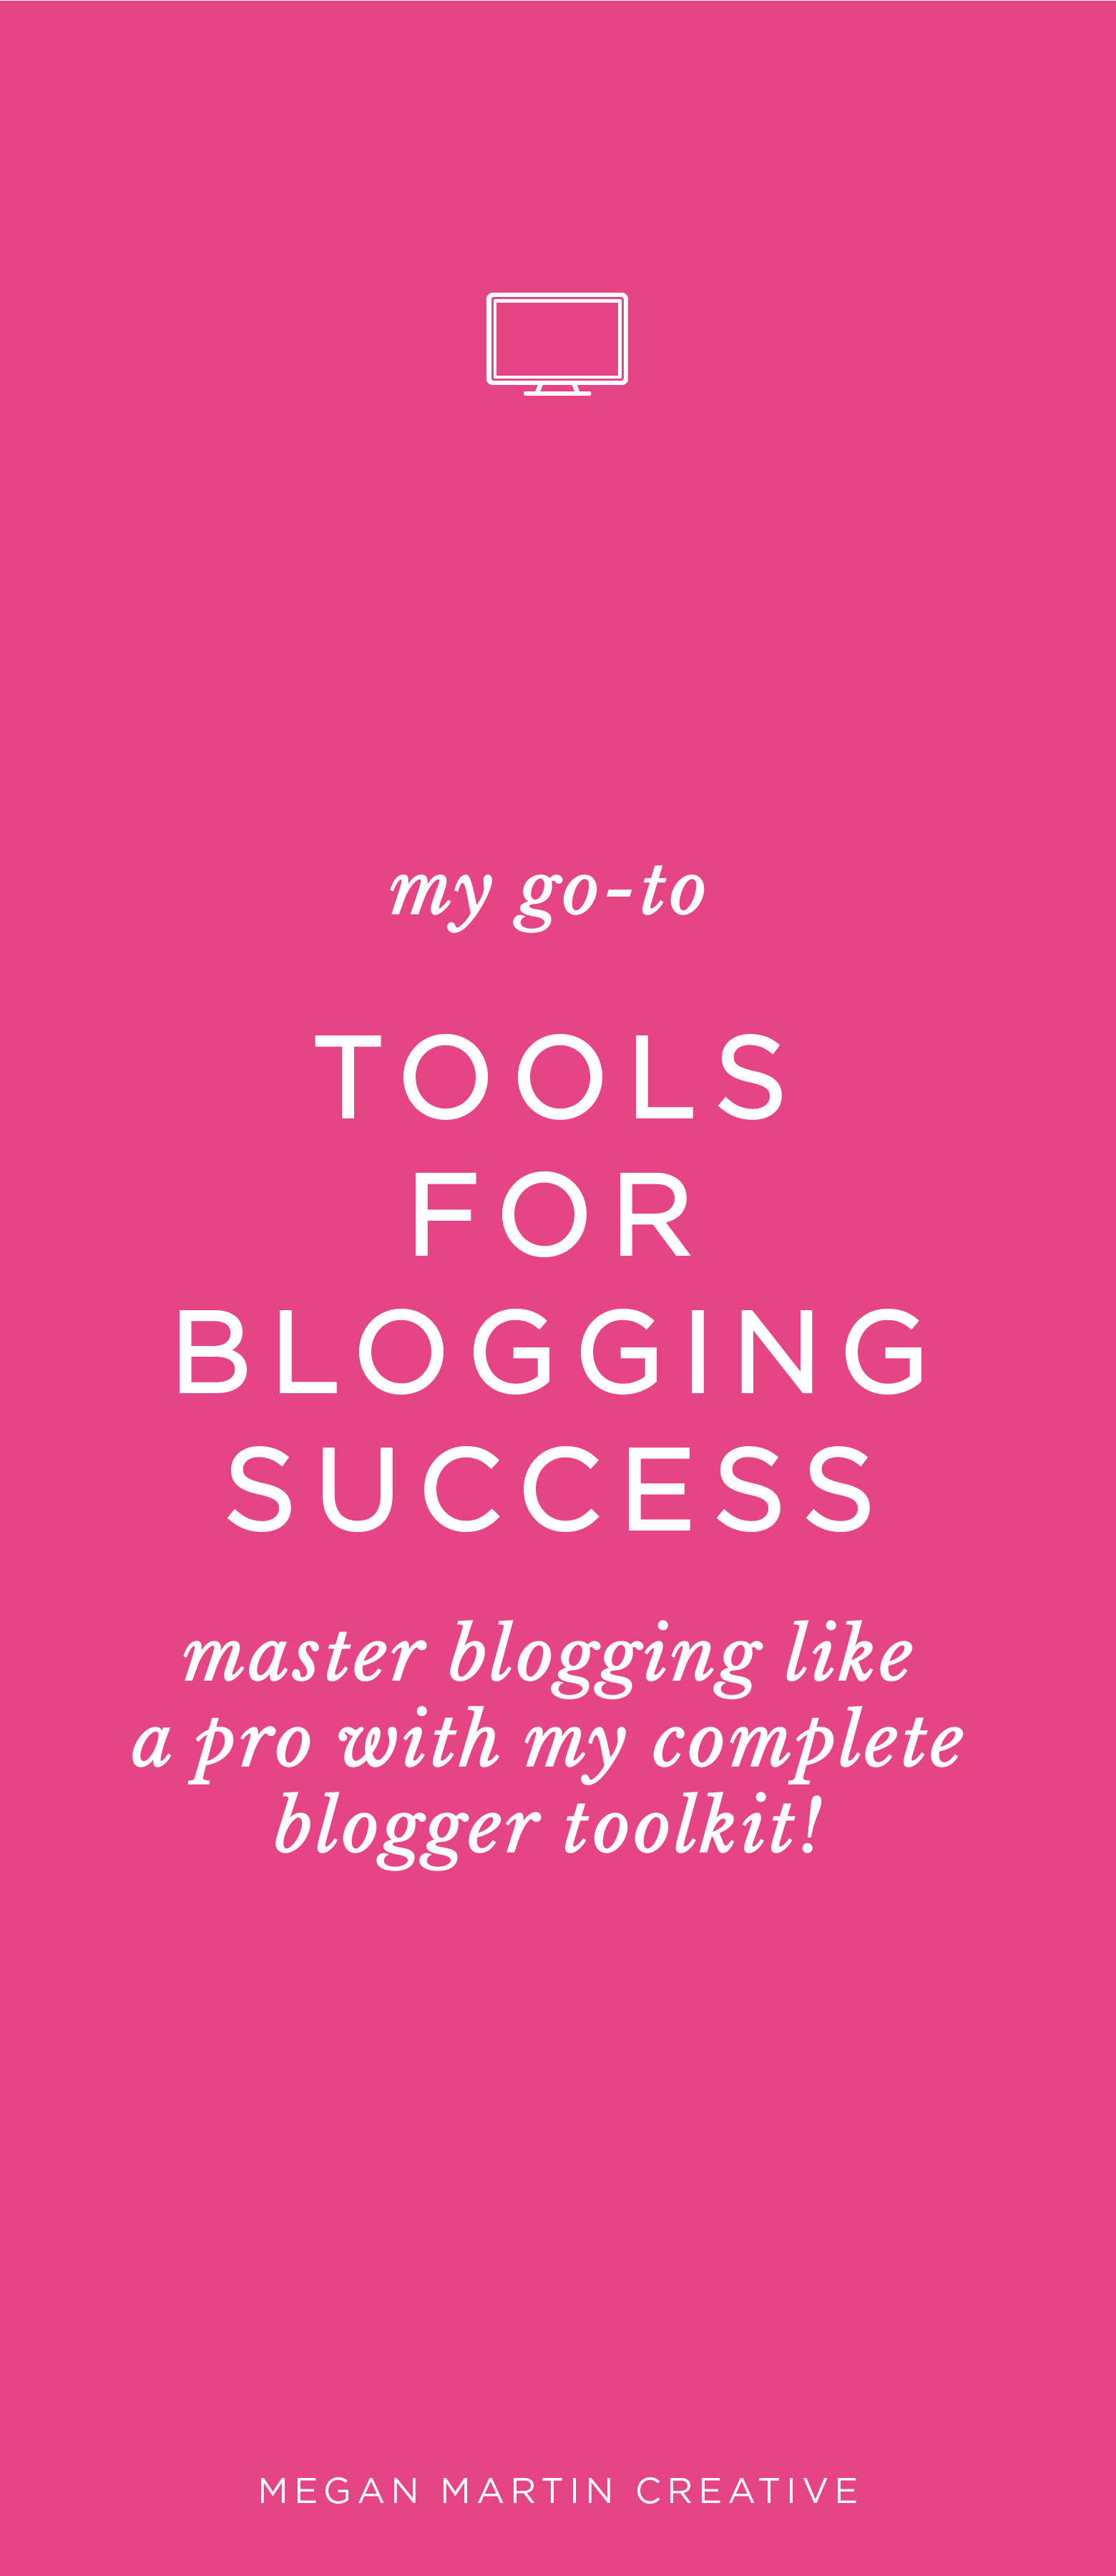 the best tools for blogging success you need now on Megan Martin Creative, blogger tips, wordpress blog, seo tips, blogstomp, coschedule, yoast, lightroom, google keyword planner, google adwords for blogging, grammarly, writing blog posts, tips for bloggers